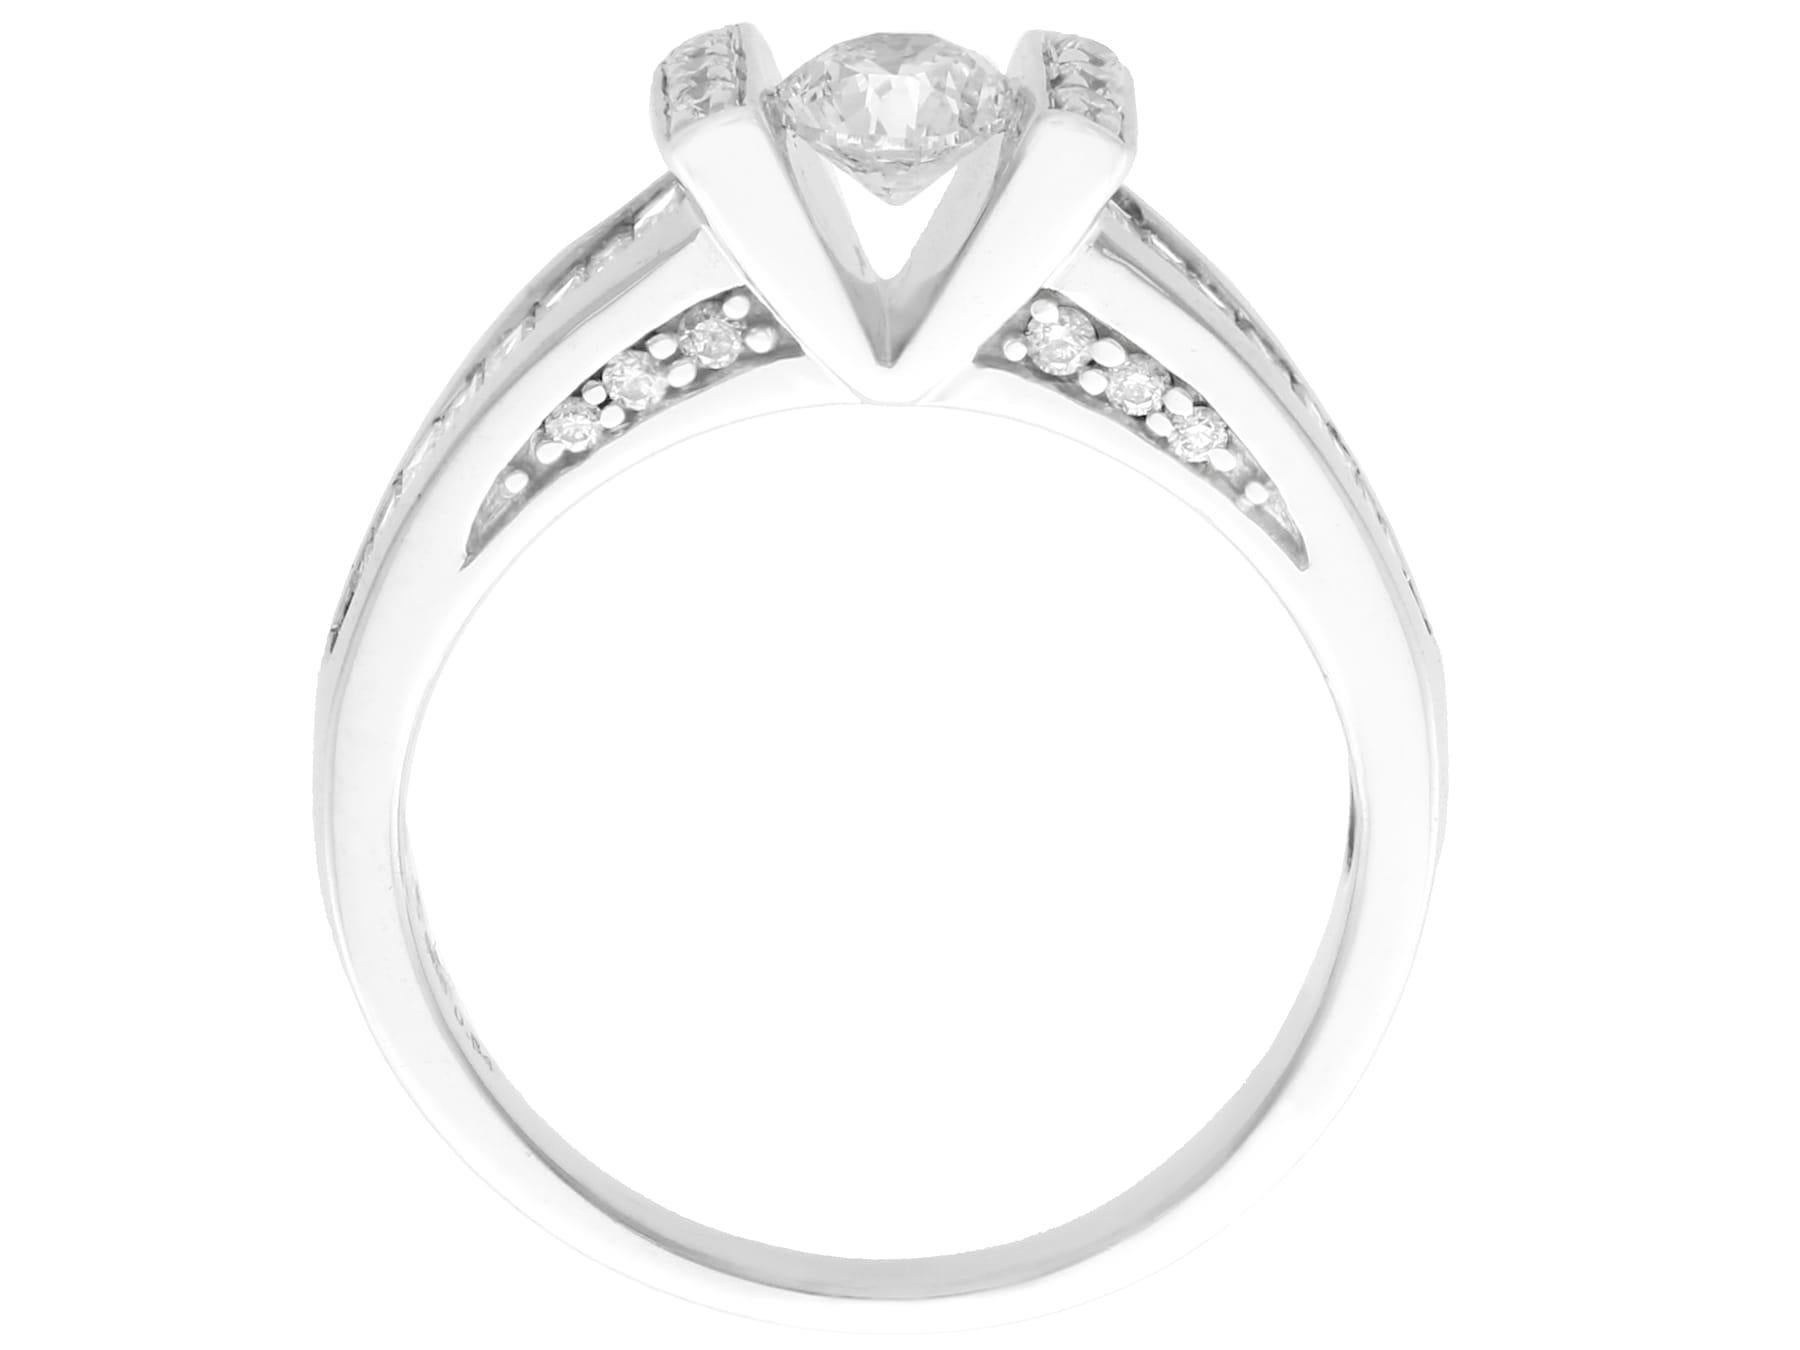 Diamond and White Gold Cocktail Ring In Excellent Condition For Sale In Jesmond, Newcastle Upon Tyne